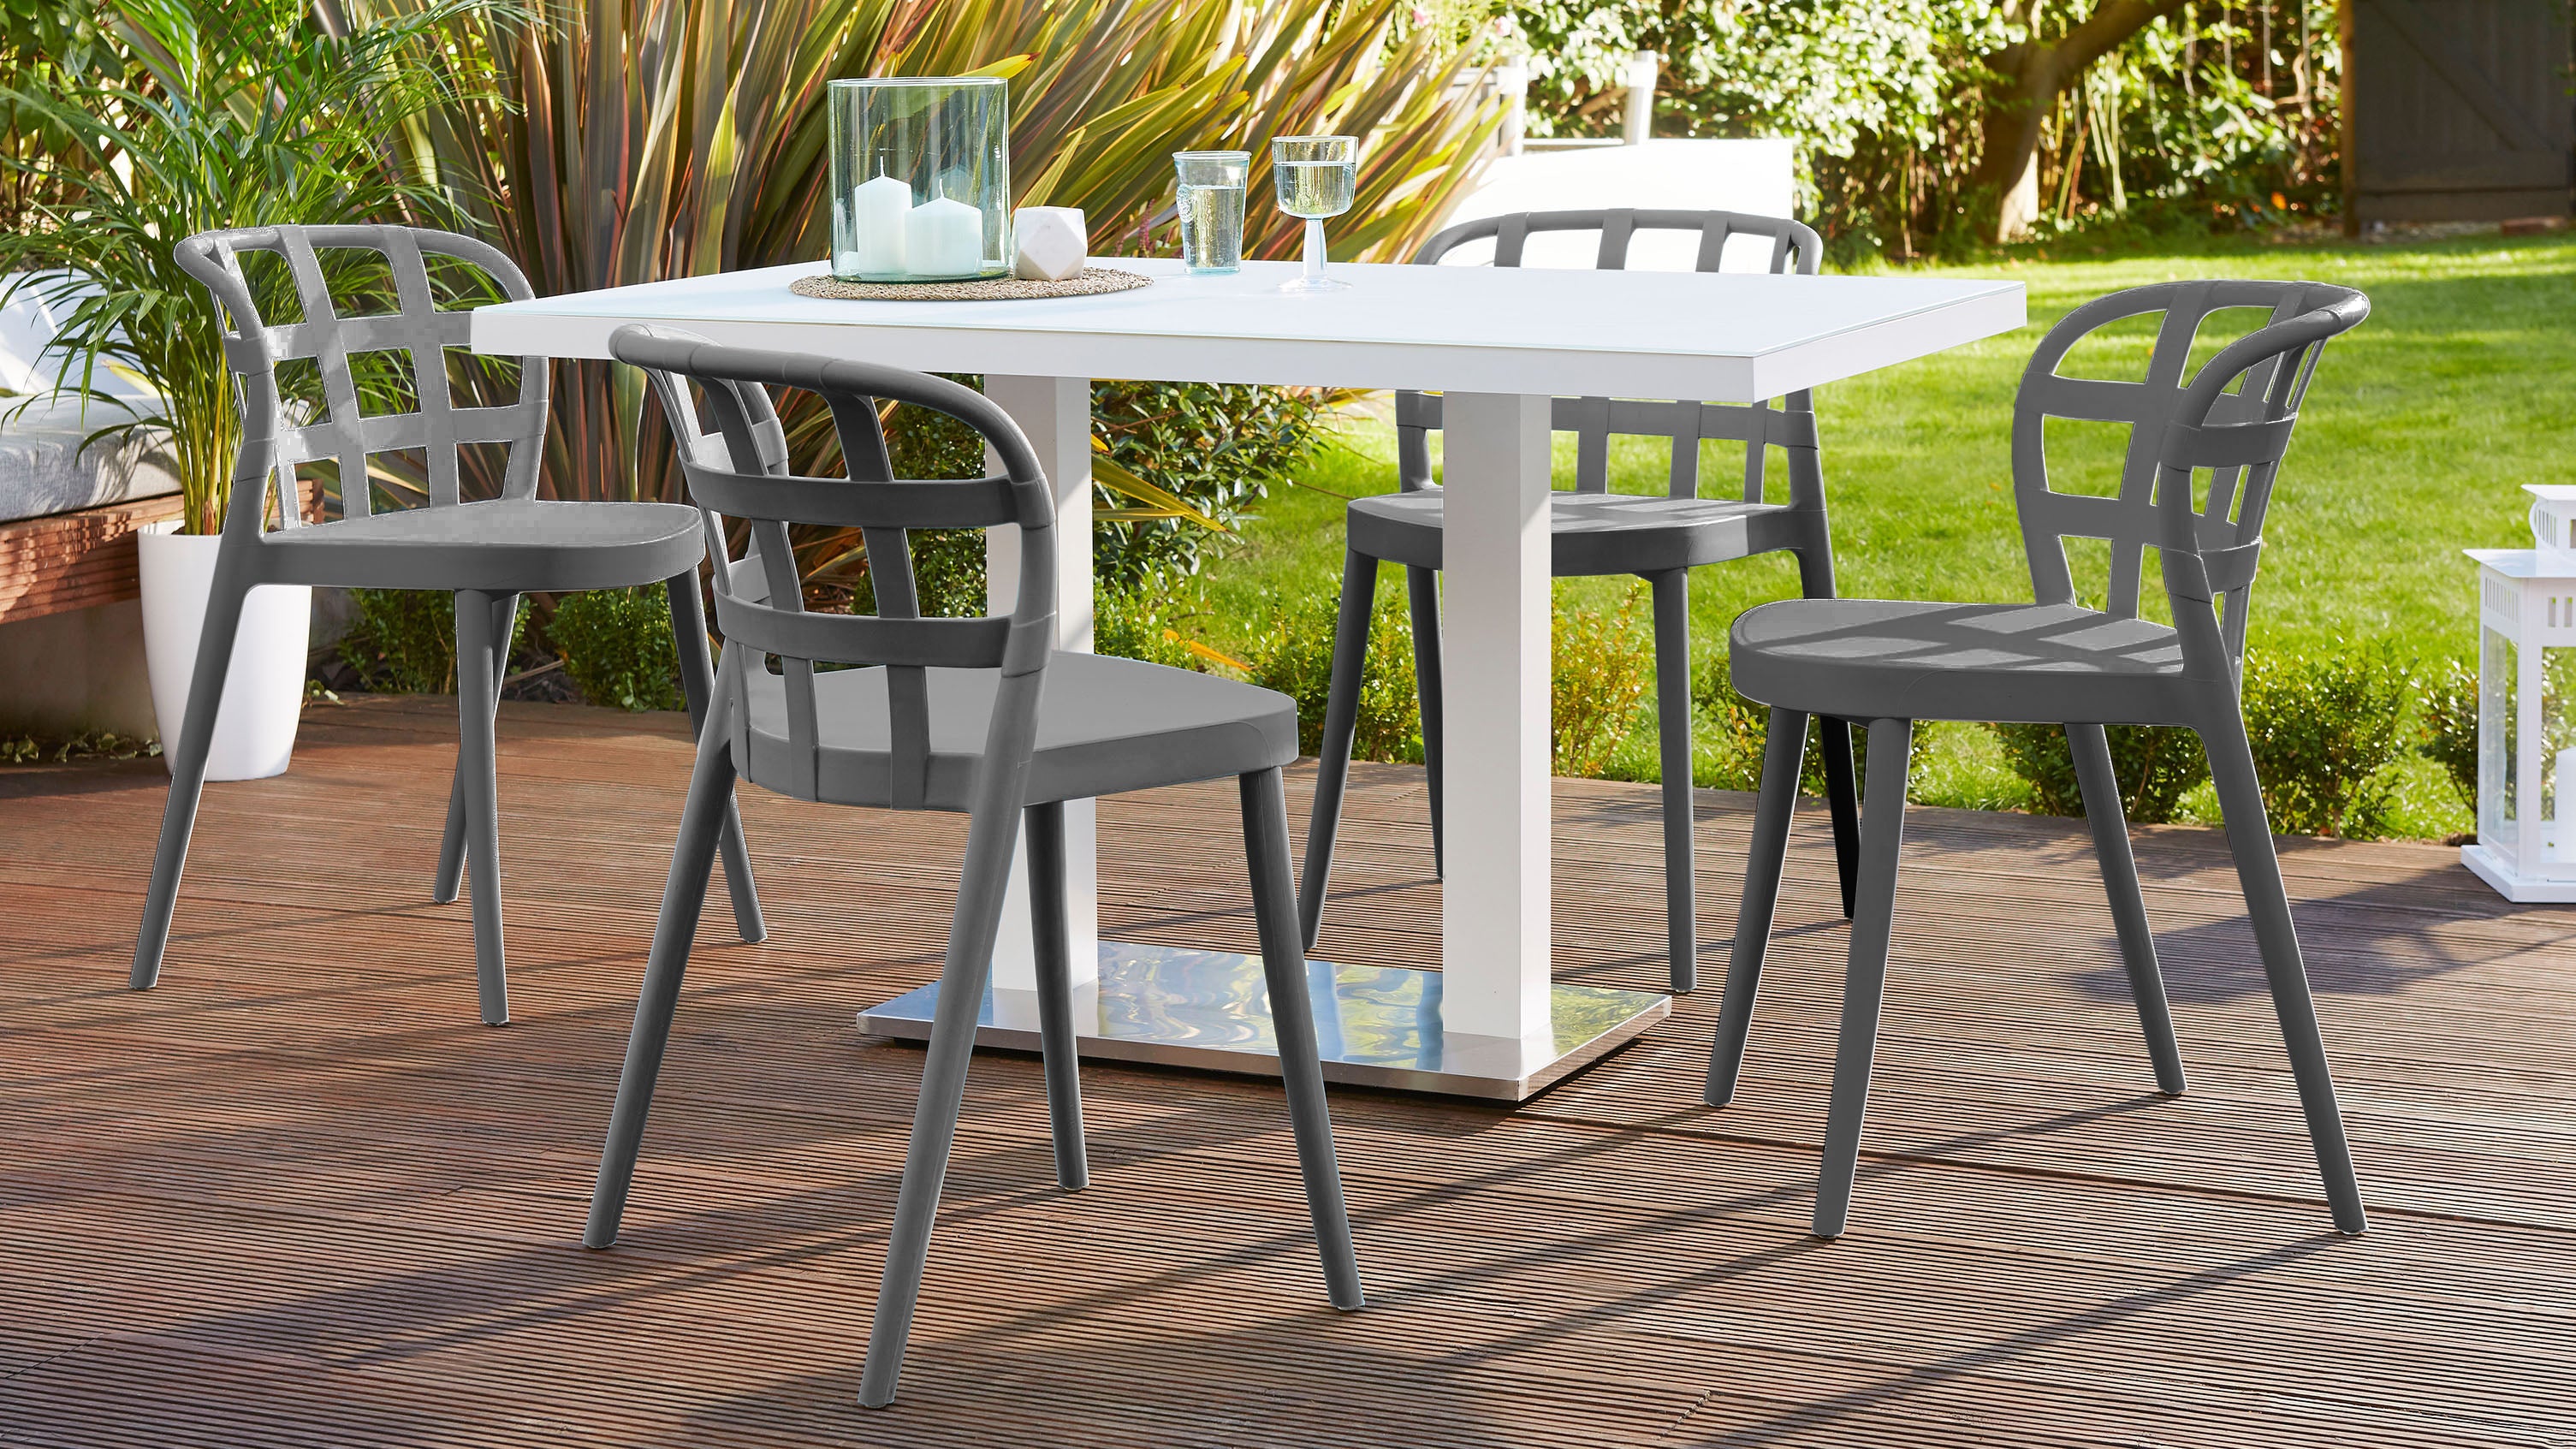 Palermo White 6 Seater Pedestal Table and Skye Garden Dining Set